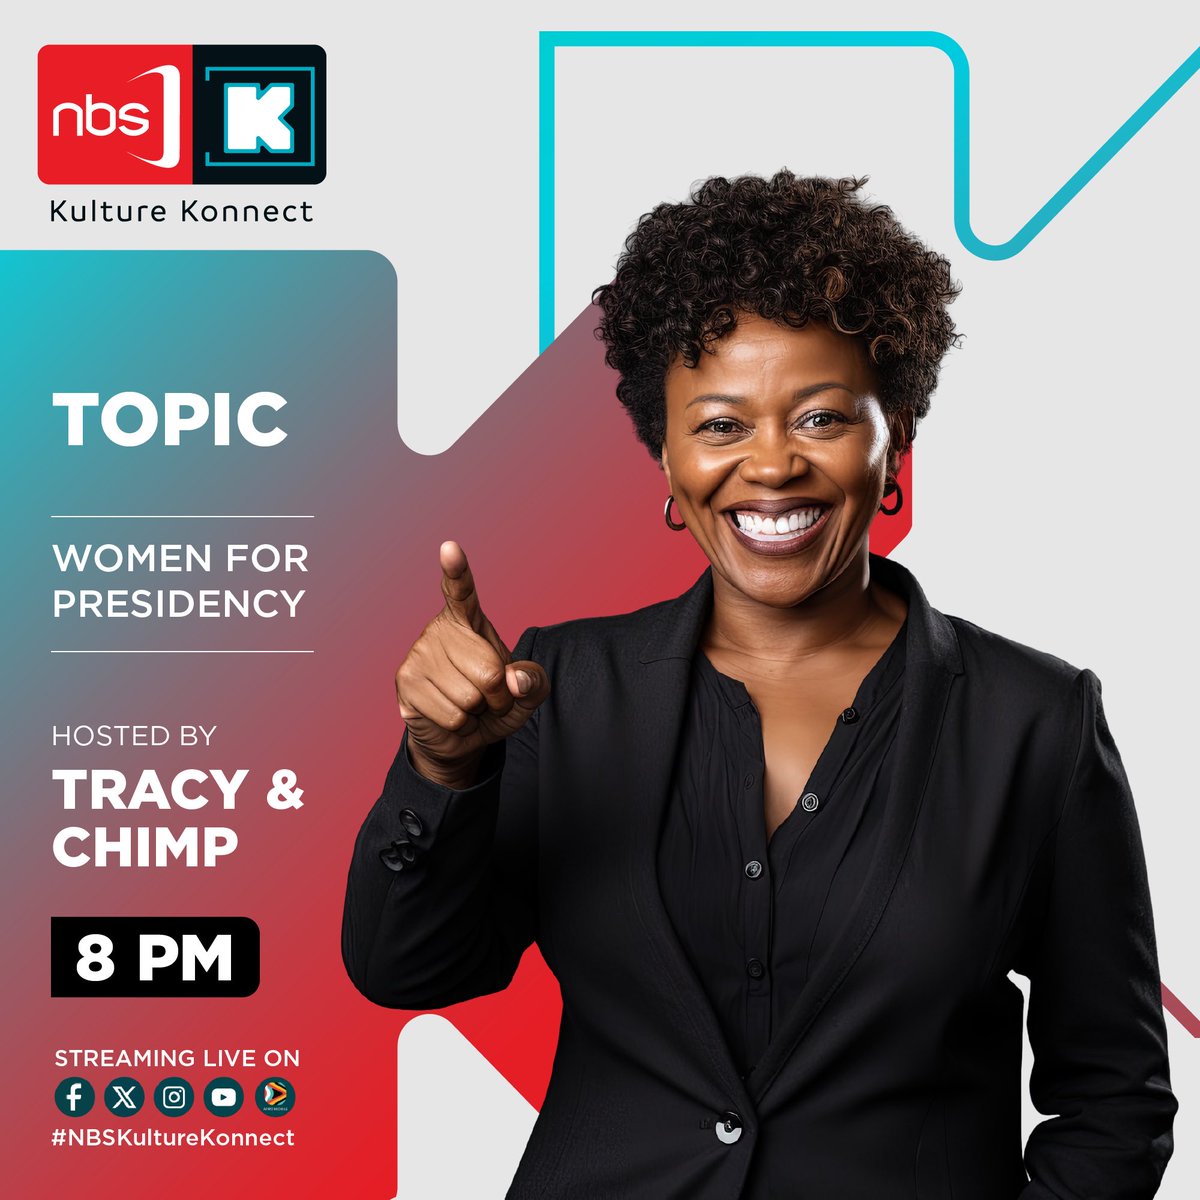 Join us tonight on #NBSKultureKonnect for a highlight on women running for the presidency. Don't miss out at 8 pm on all our platforms! #NextKulture